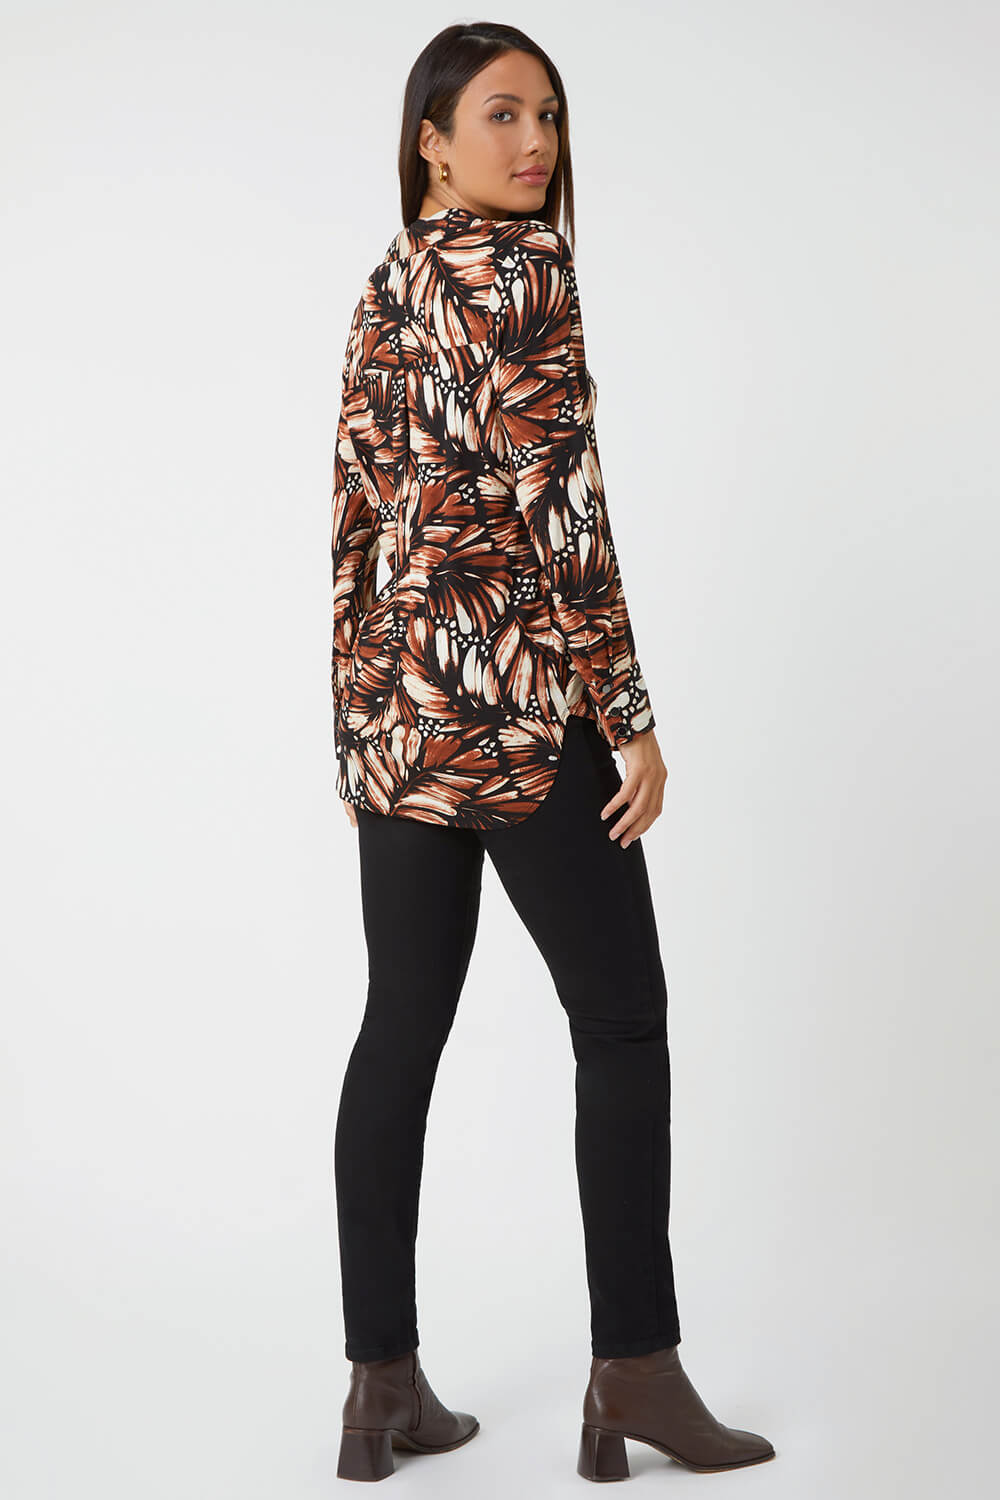 Stone Feather Print Stretch Shirt, Image 3 of 5